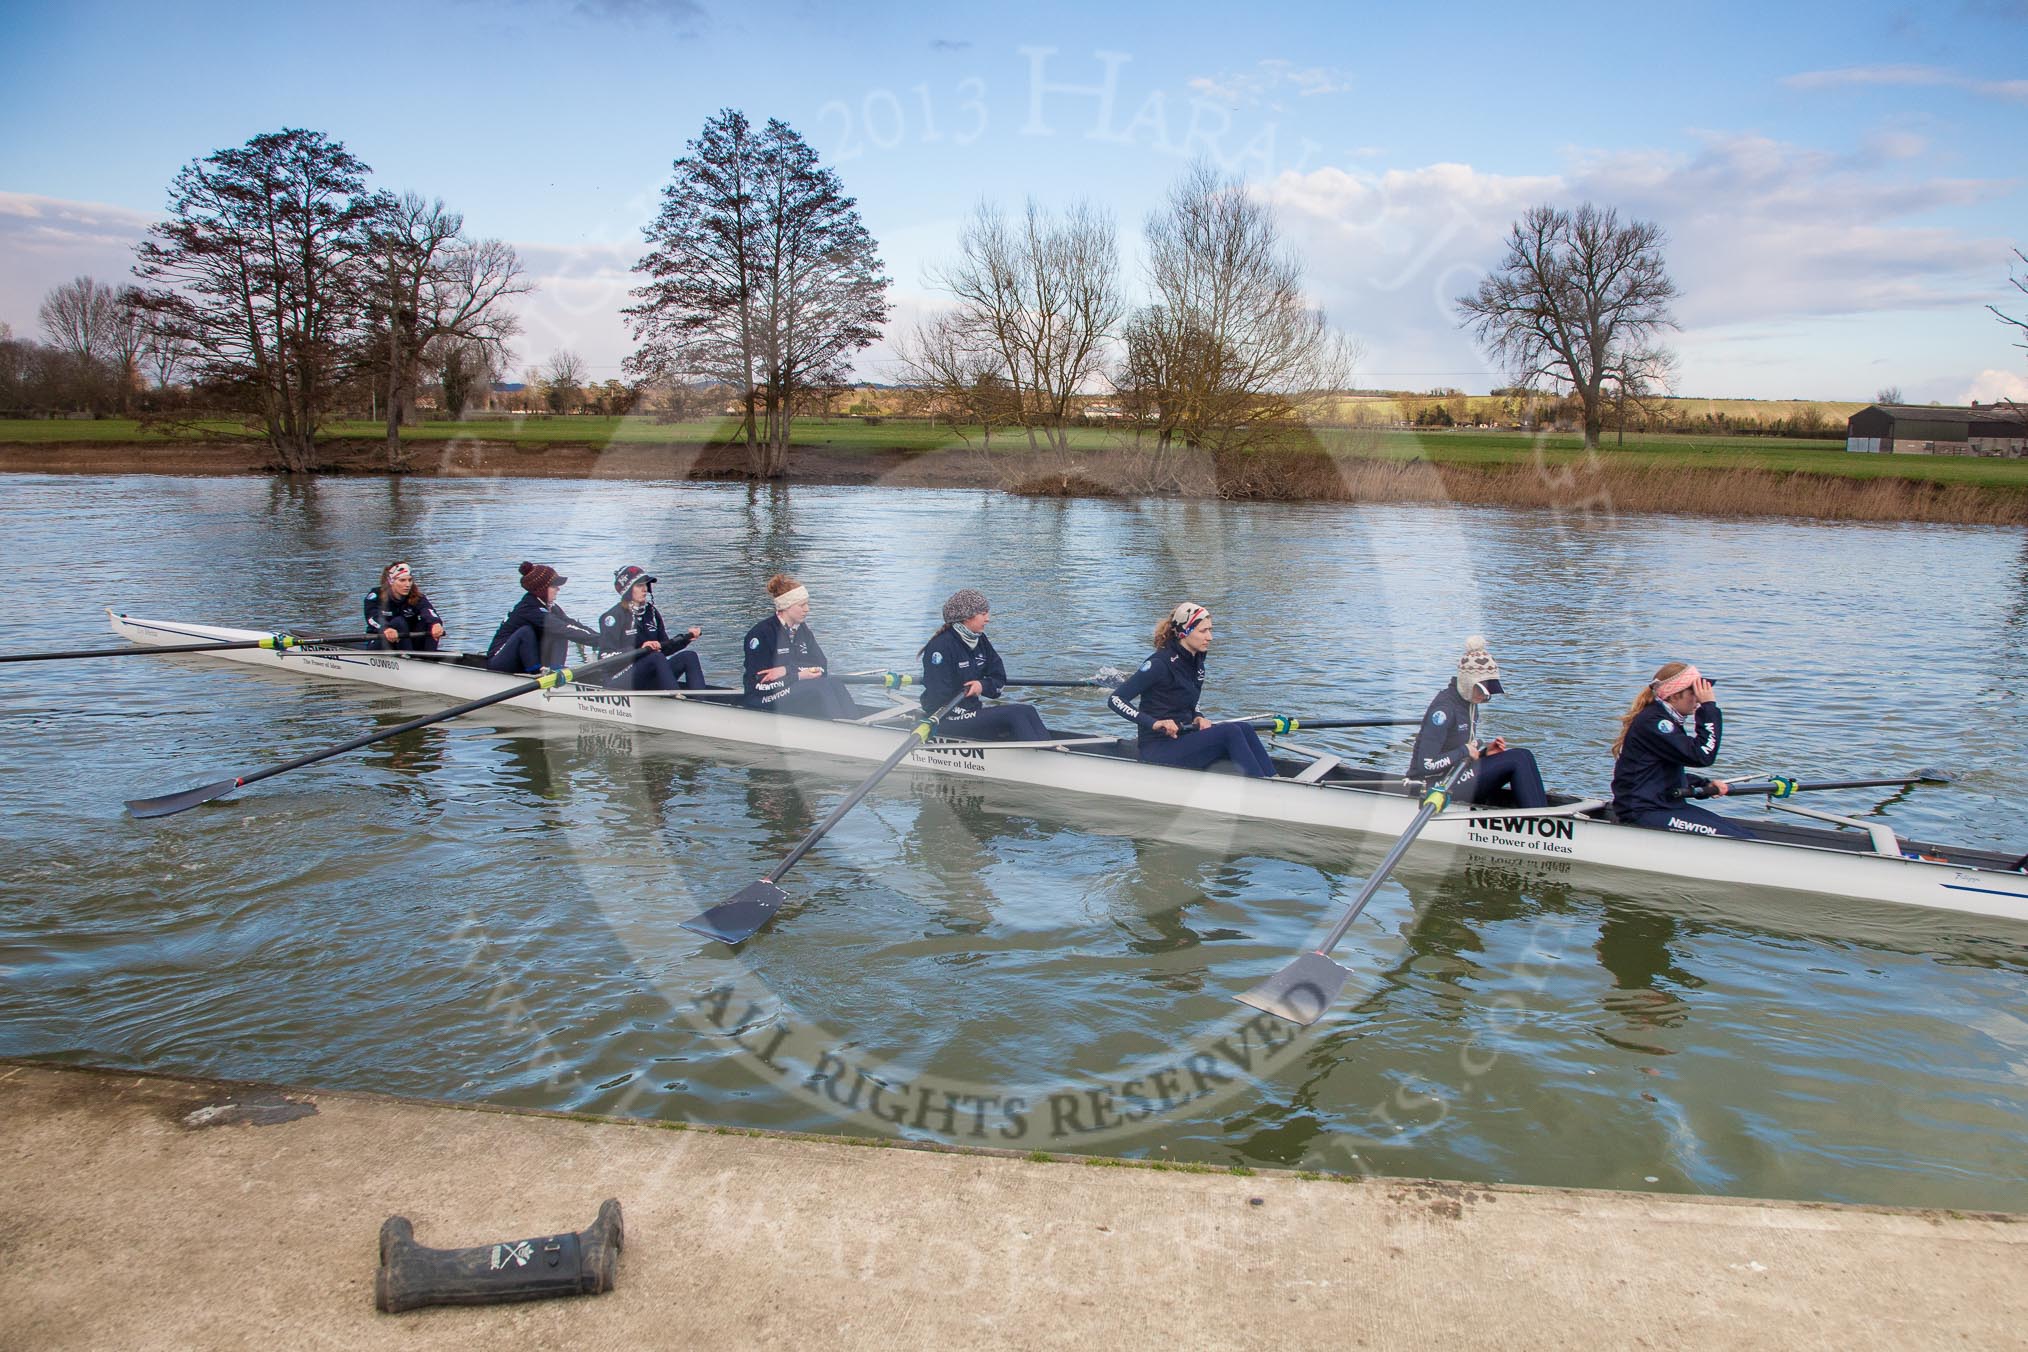 The Boat Race season 2013 - OUWBC training: The crew of Osiris, the OUWBC reserve boat, getting ready: Bow Coralie Viollet-Djelassi, then Elspeth Cumber, Hannah Ledbury, Eleanor Darlington, Rachel Purkess, Caitlin Goss, Annika Bruger, and stroke Emily Chittock..
Fleming Boathouse,
Wallingford,
Oxfordshire,
United Kingdom,
on 13 March 2013 at 16:53, image #35